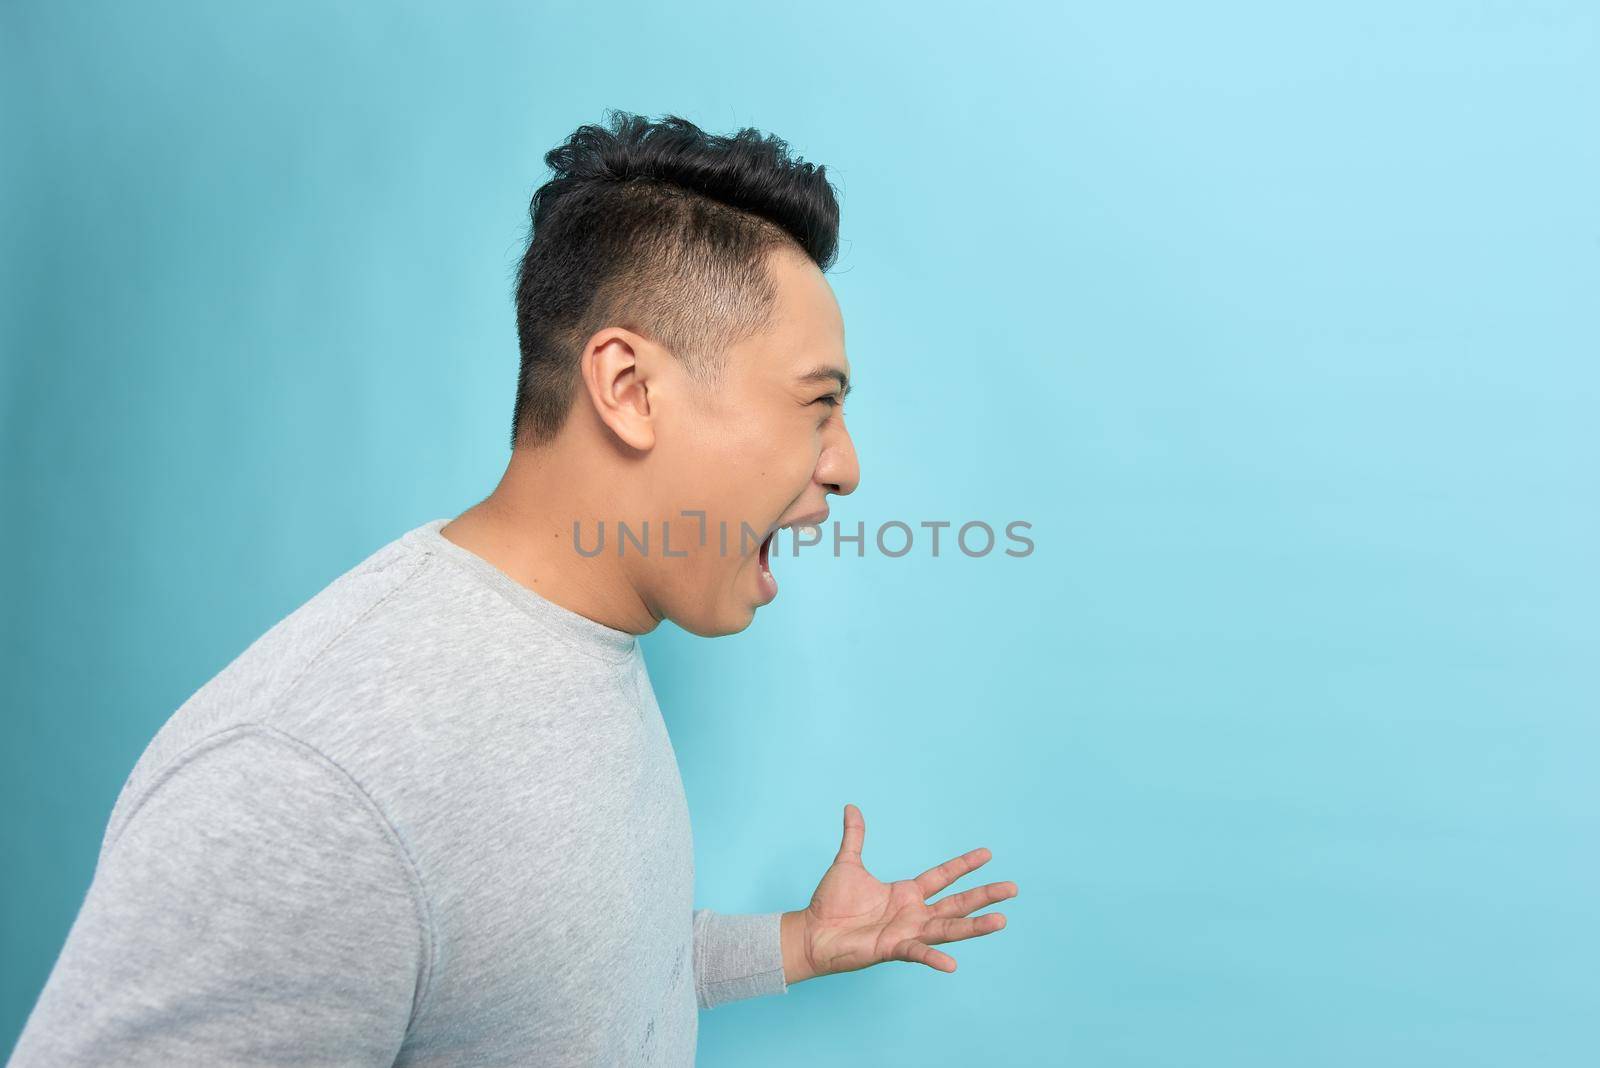 Closeup side view profile portrait of angry upset young man isolated on blue background.